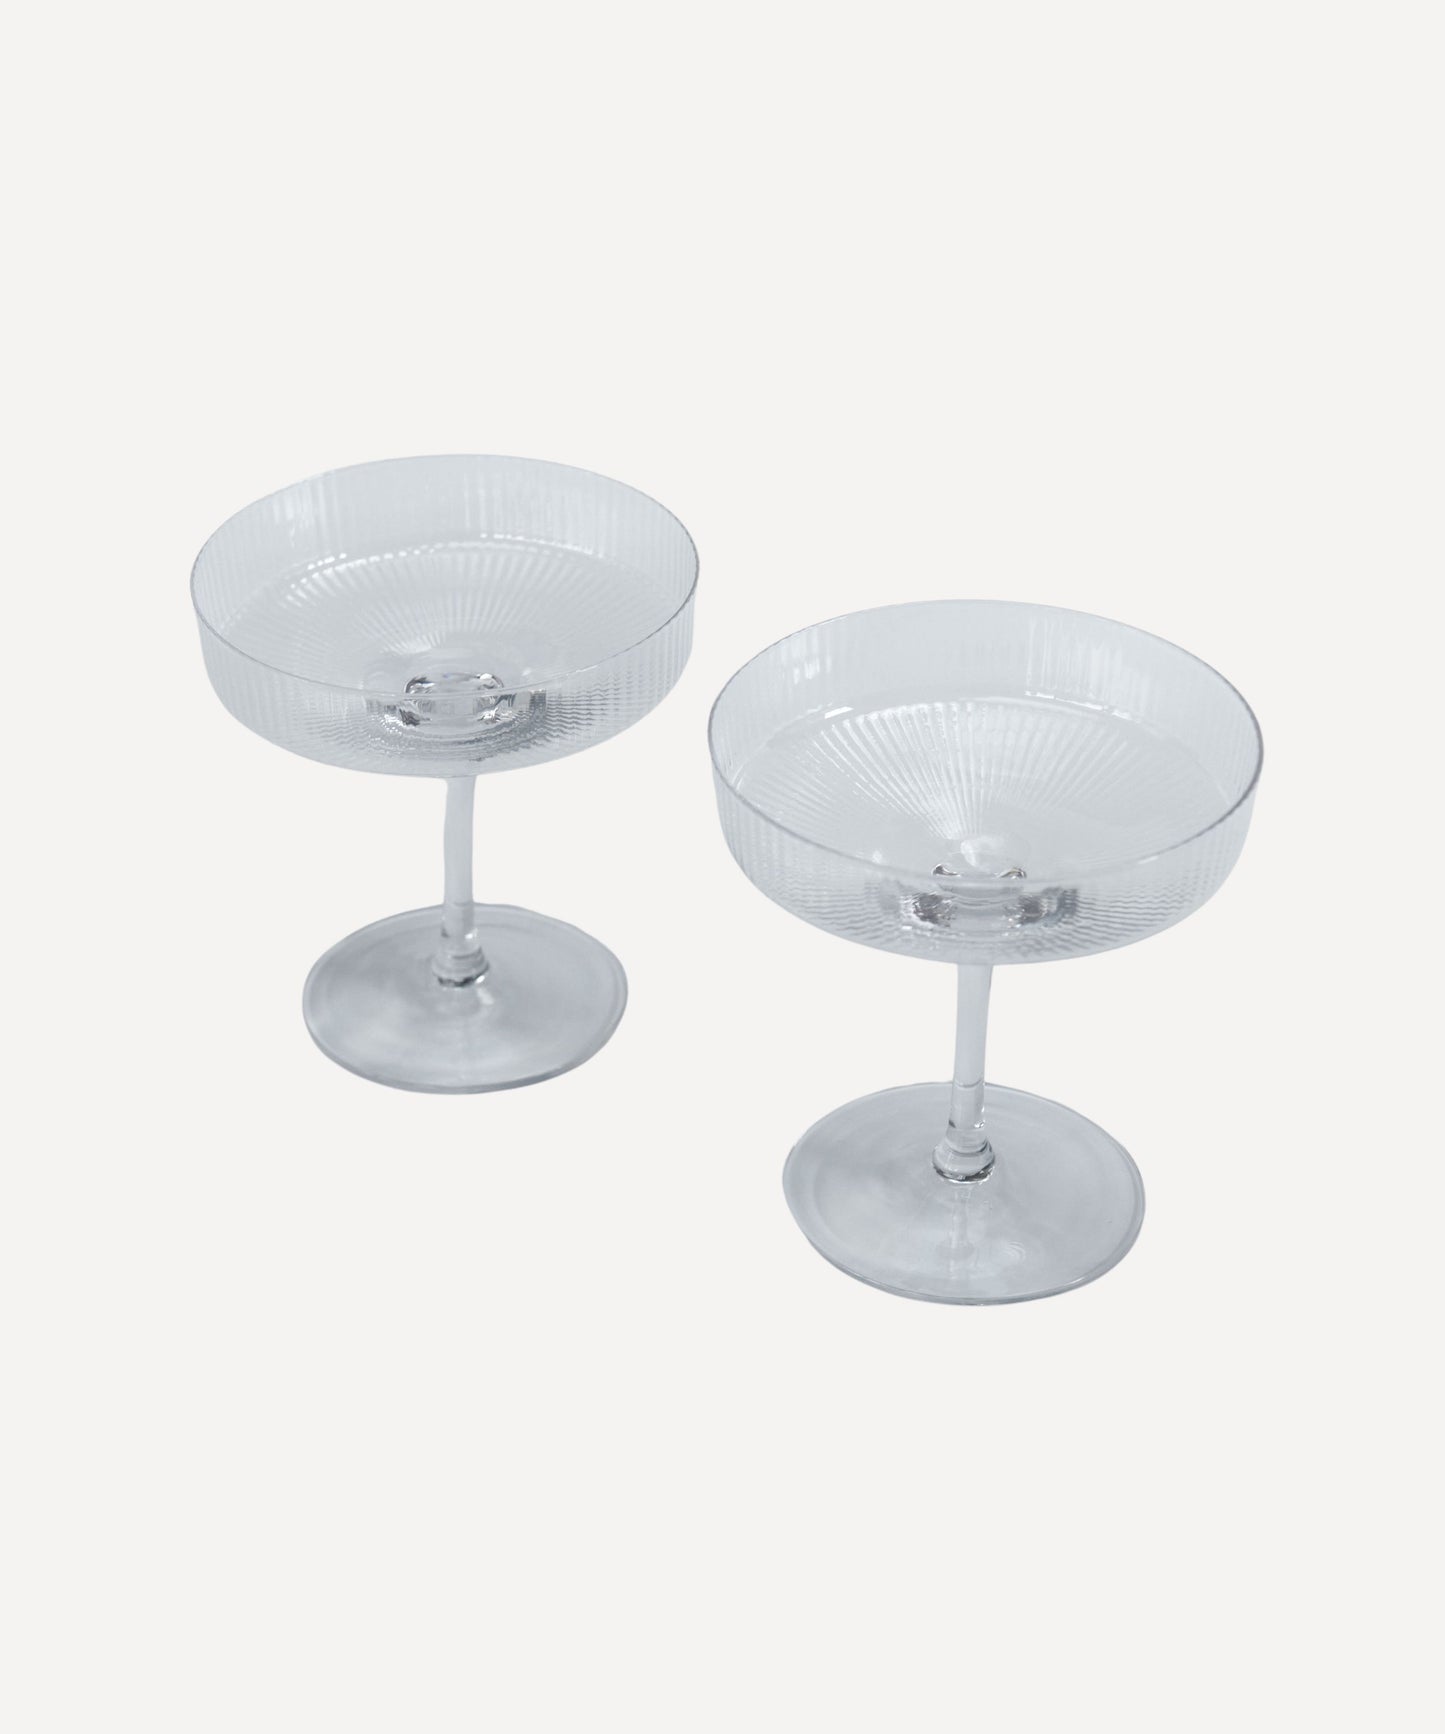 Reeded Coupe Glass - Set of 2